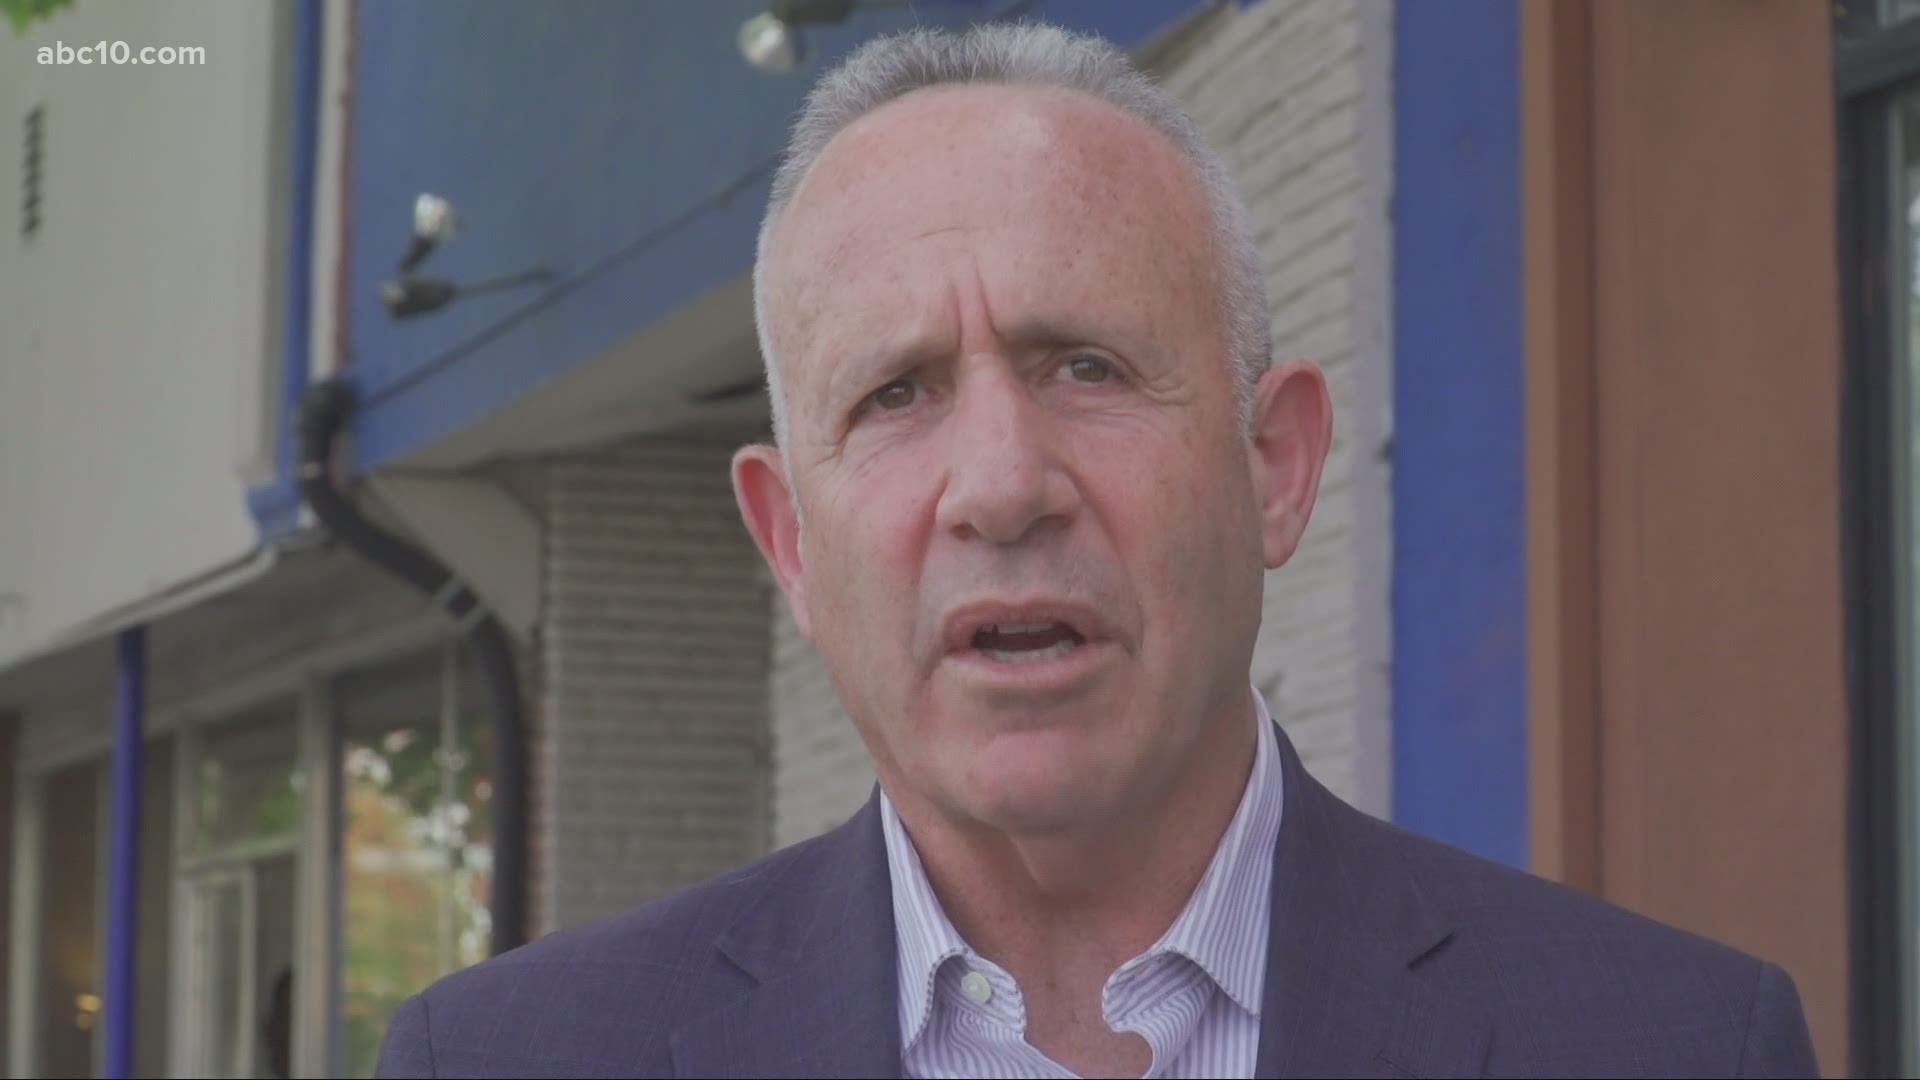 Mayor Darrell Steinberg called on the Sacramento City Manager to draft a possible vaccine mandate for city employees